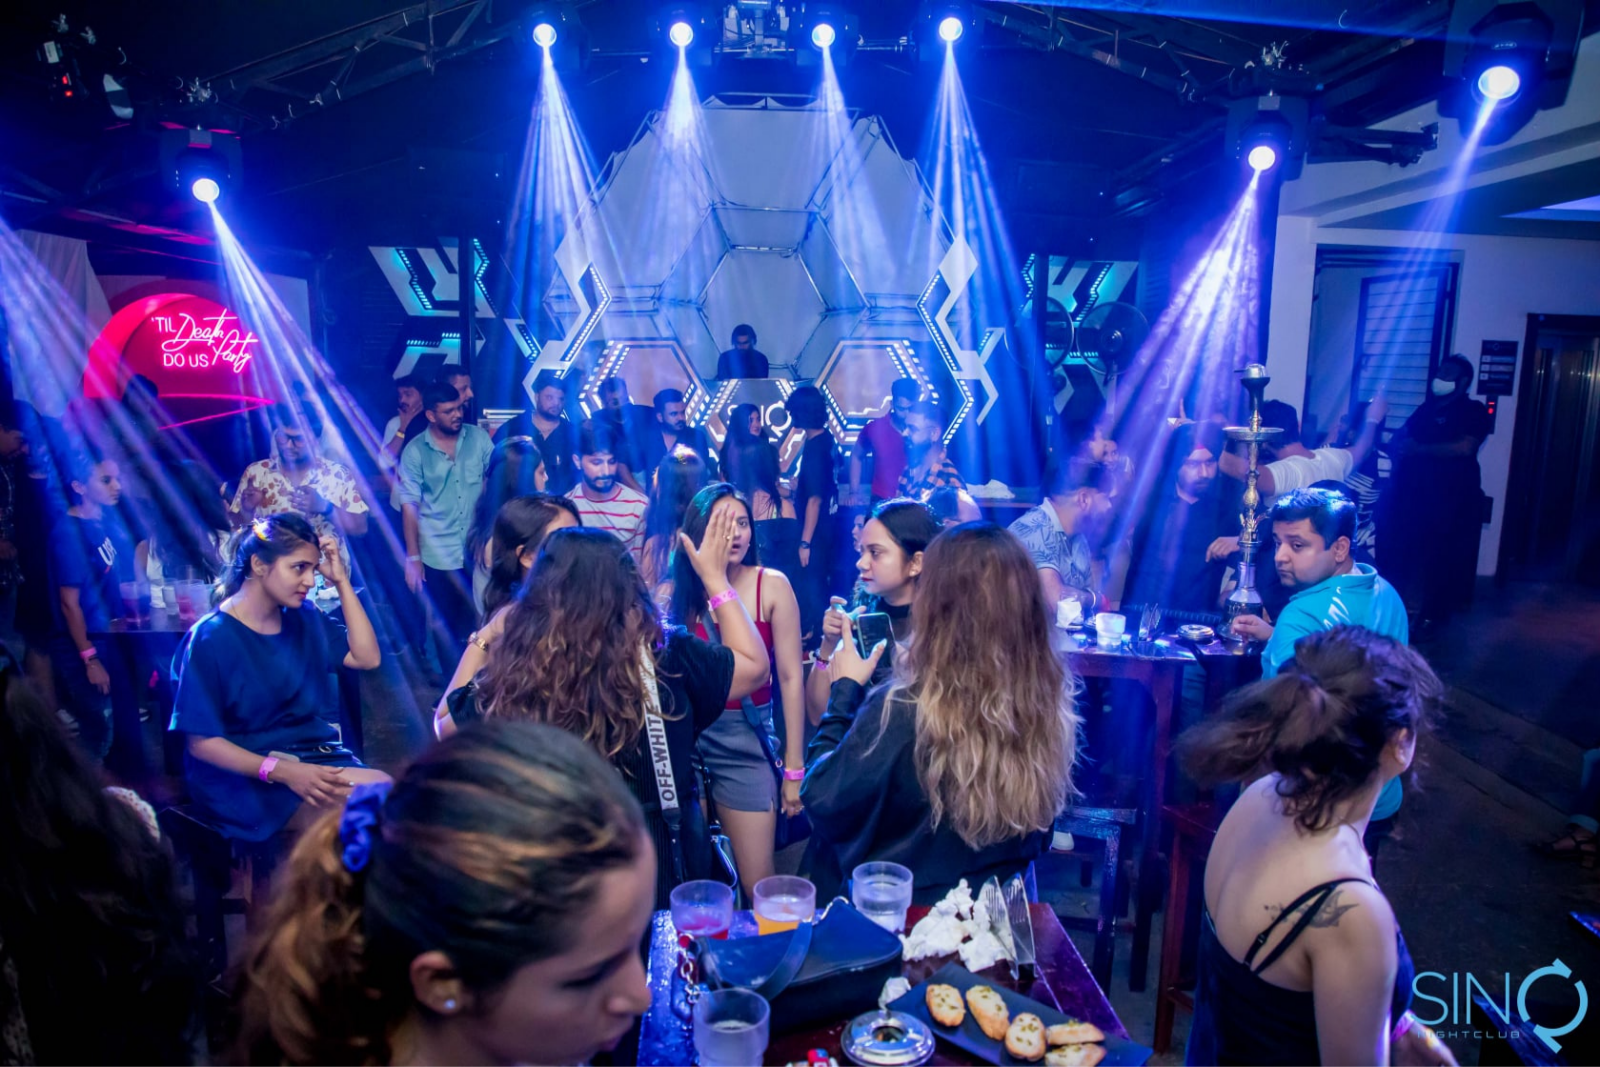 Sinq Night Club Goa - Timings, Entry Ticket, Best Season, Attractions & More